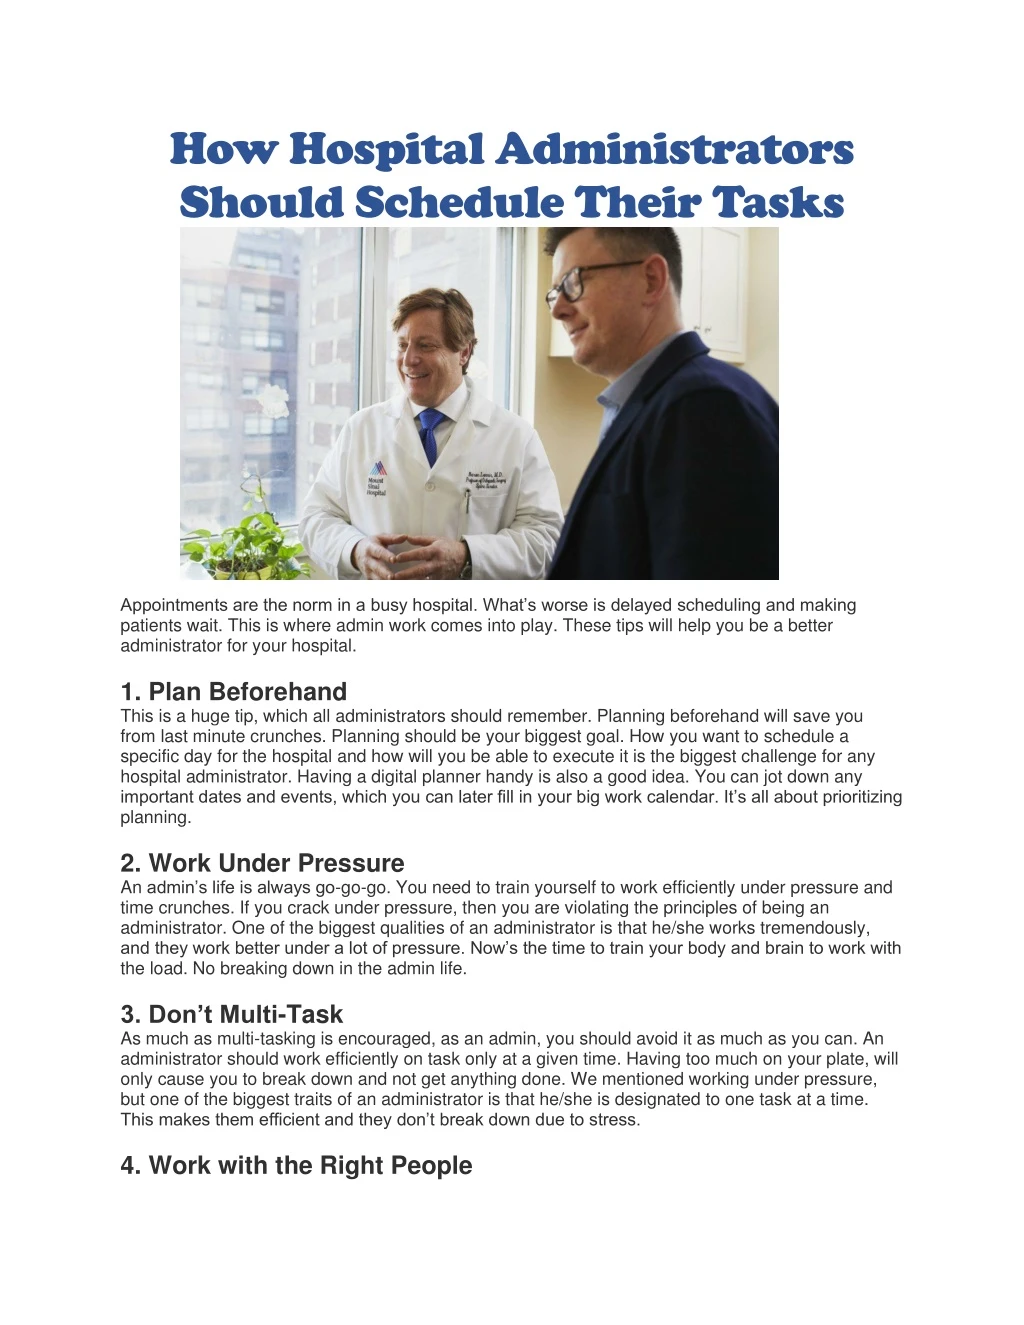 how hospital administrators should schedule their